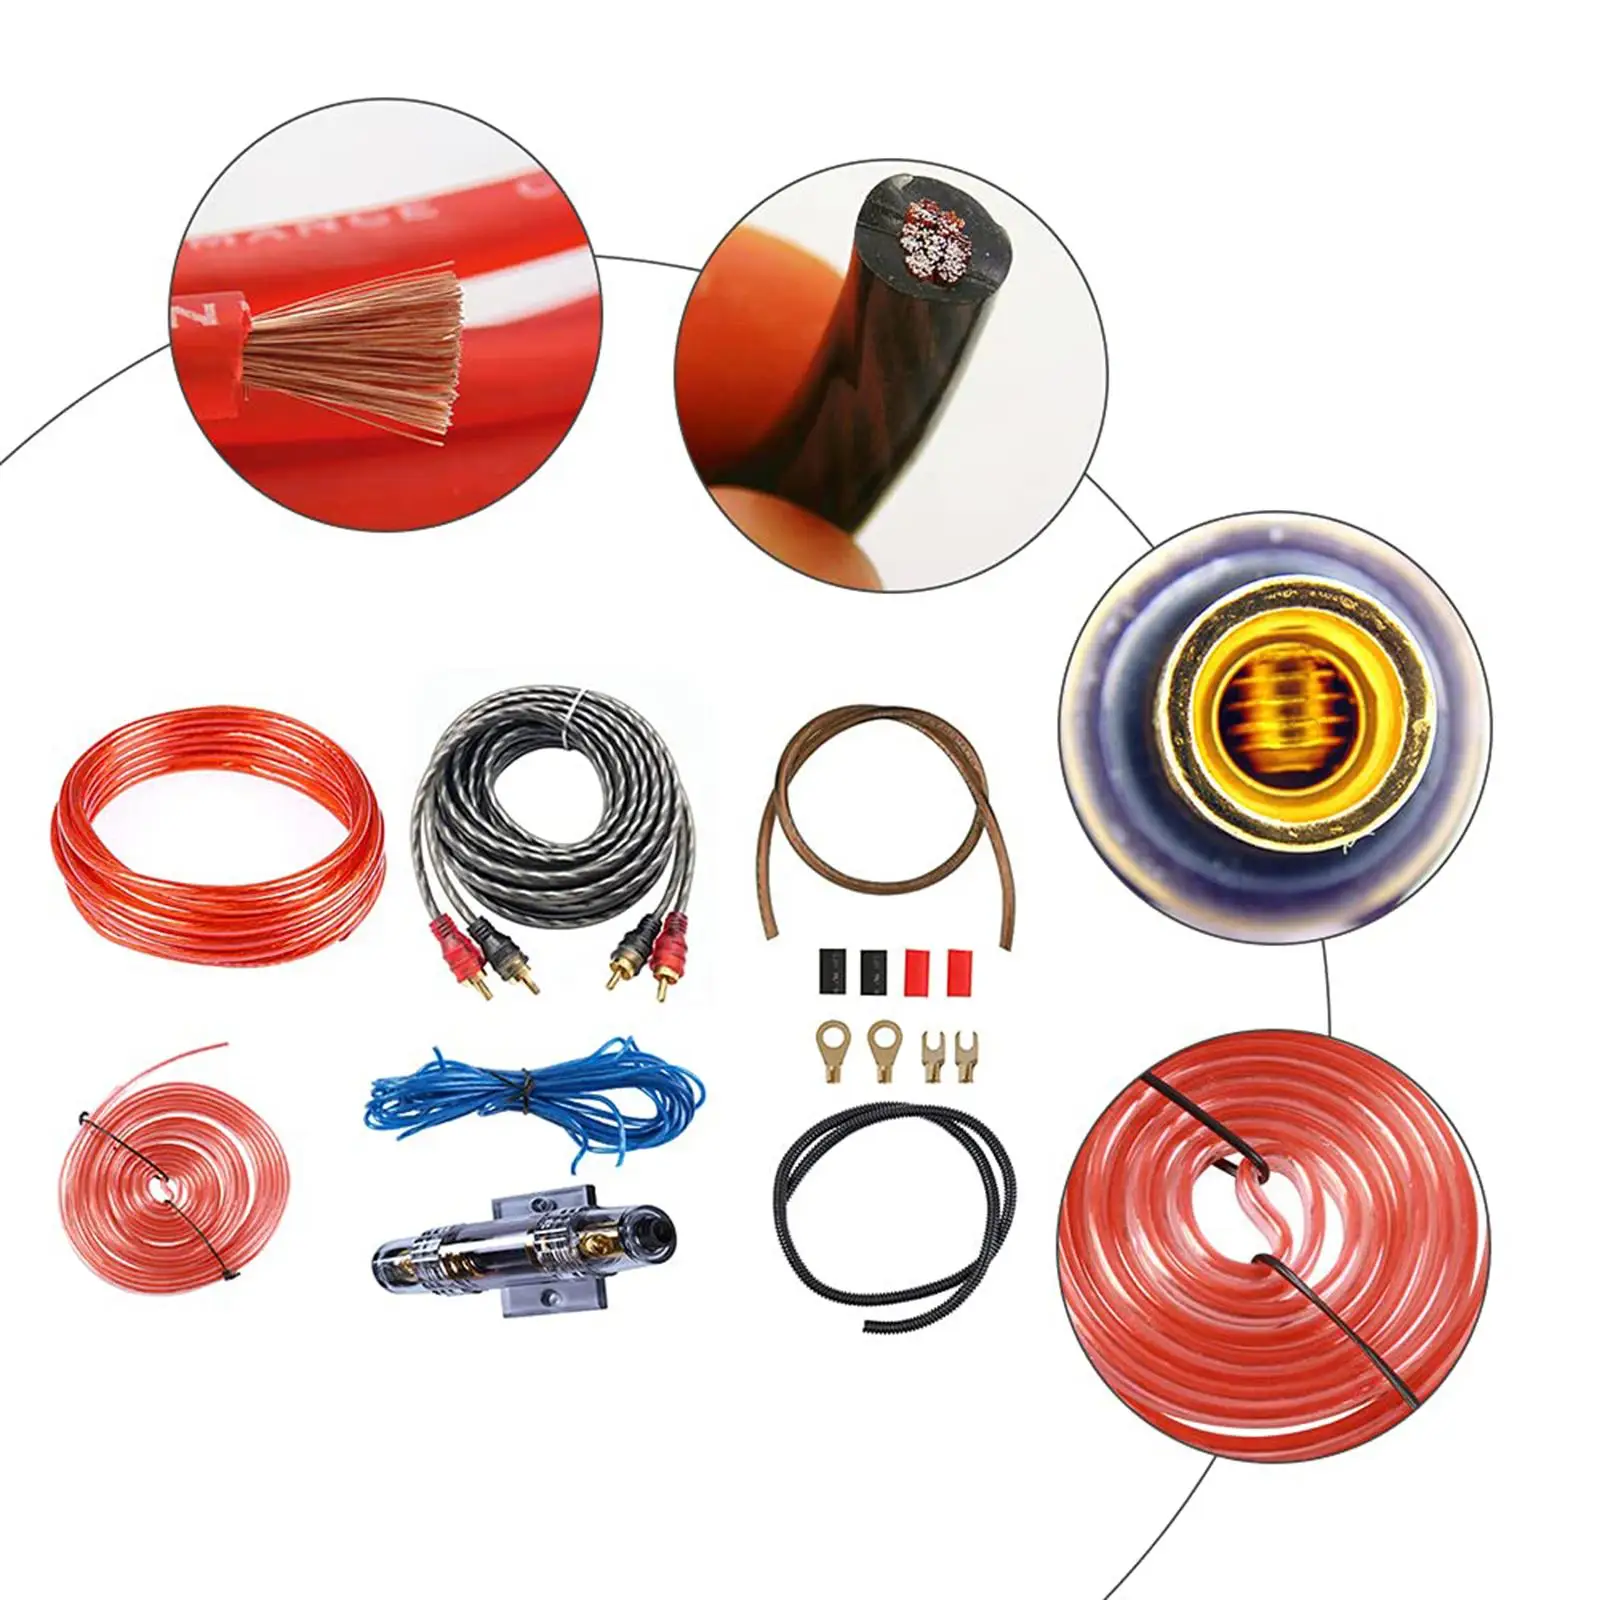 

Car Audio Wiring Kit Amplifier Electrical Equipment Supplies Sound System Audio Cable Kit PVC Woofer Wiring Kit Power Cable